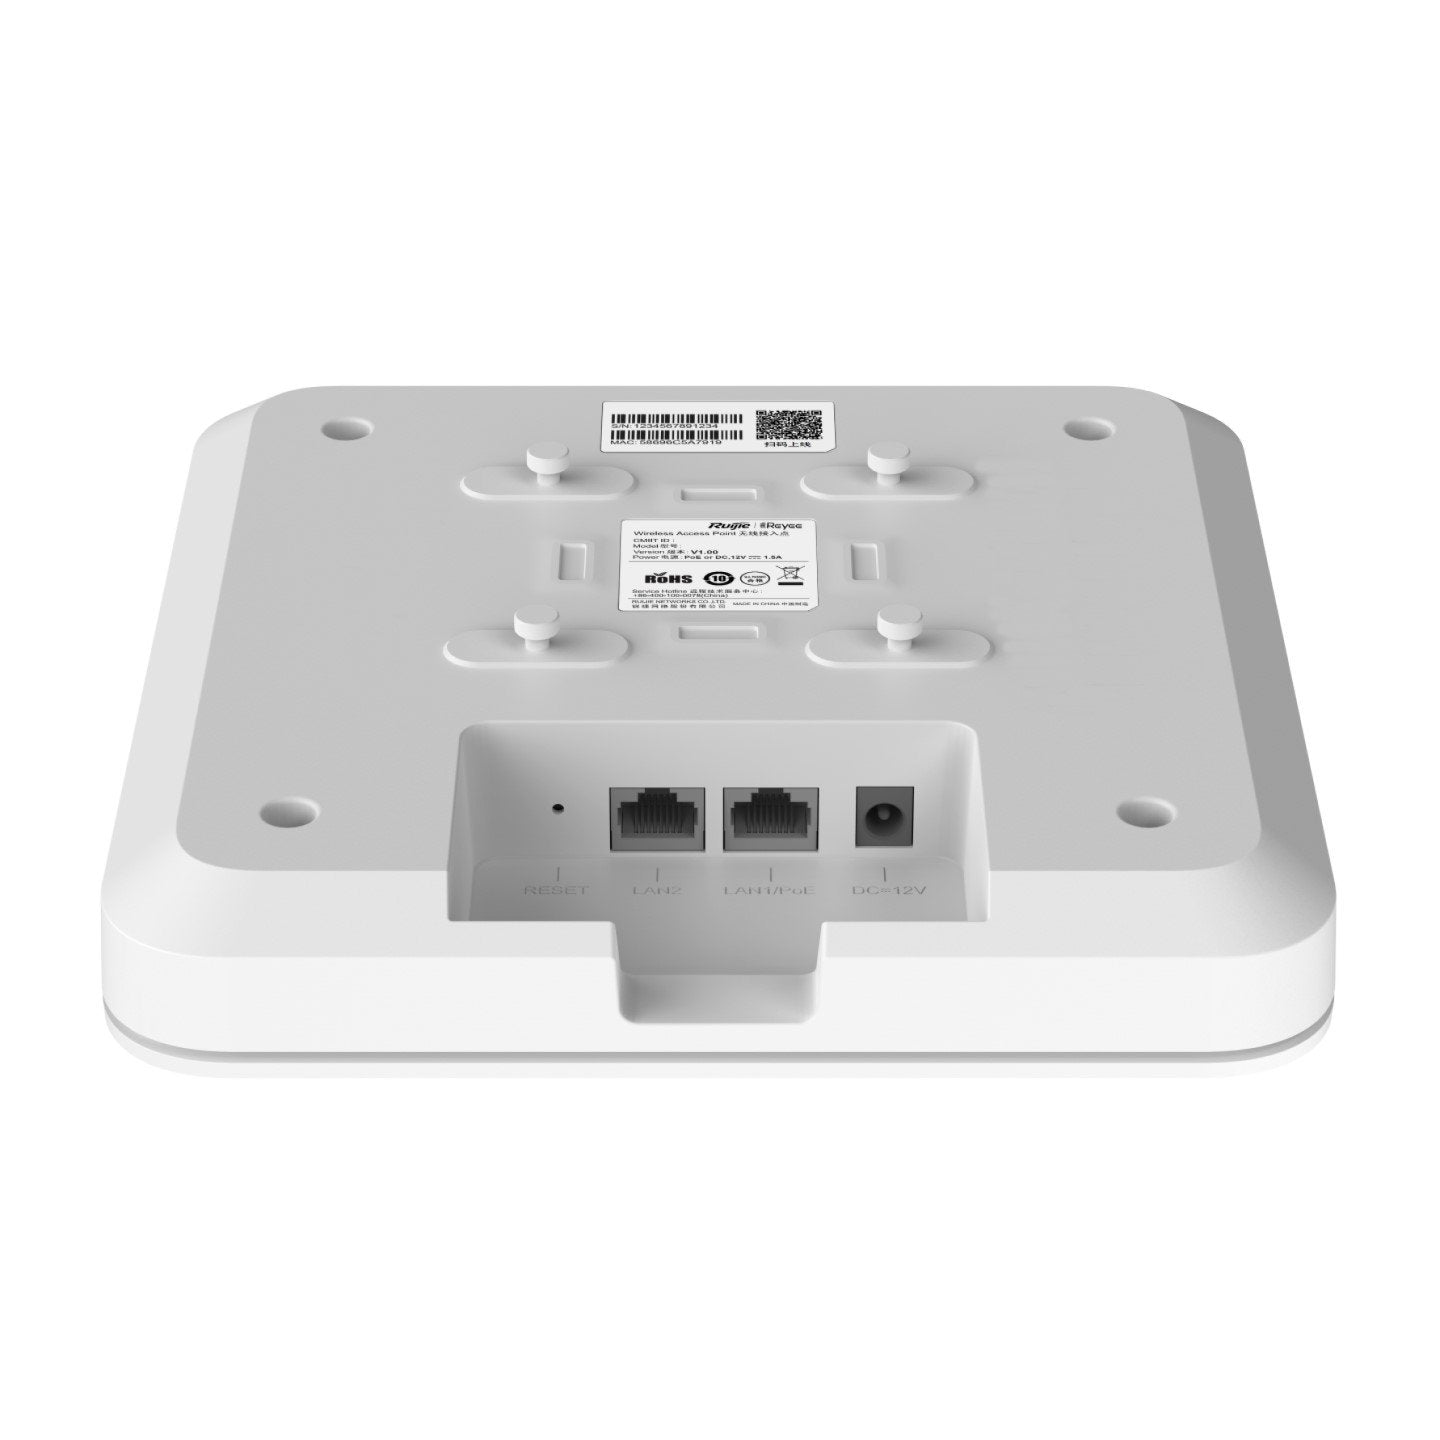 Ruijie* Reyee Internal WiFi6 Gigabit Access Point AX3200, 800Mbps, Dual Band Up To 2402Mbps, POE / 12VDC (Up To 30M Range)